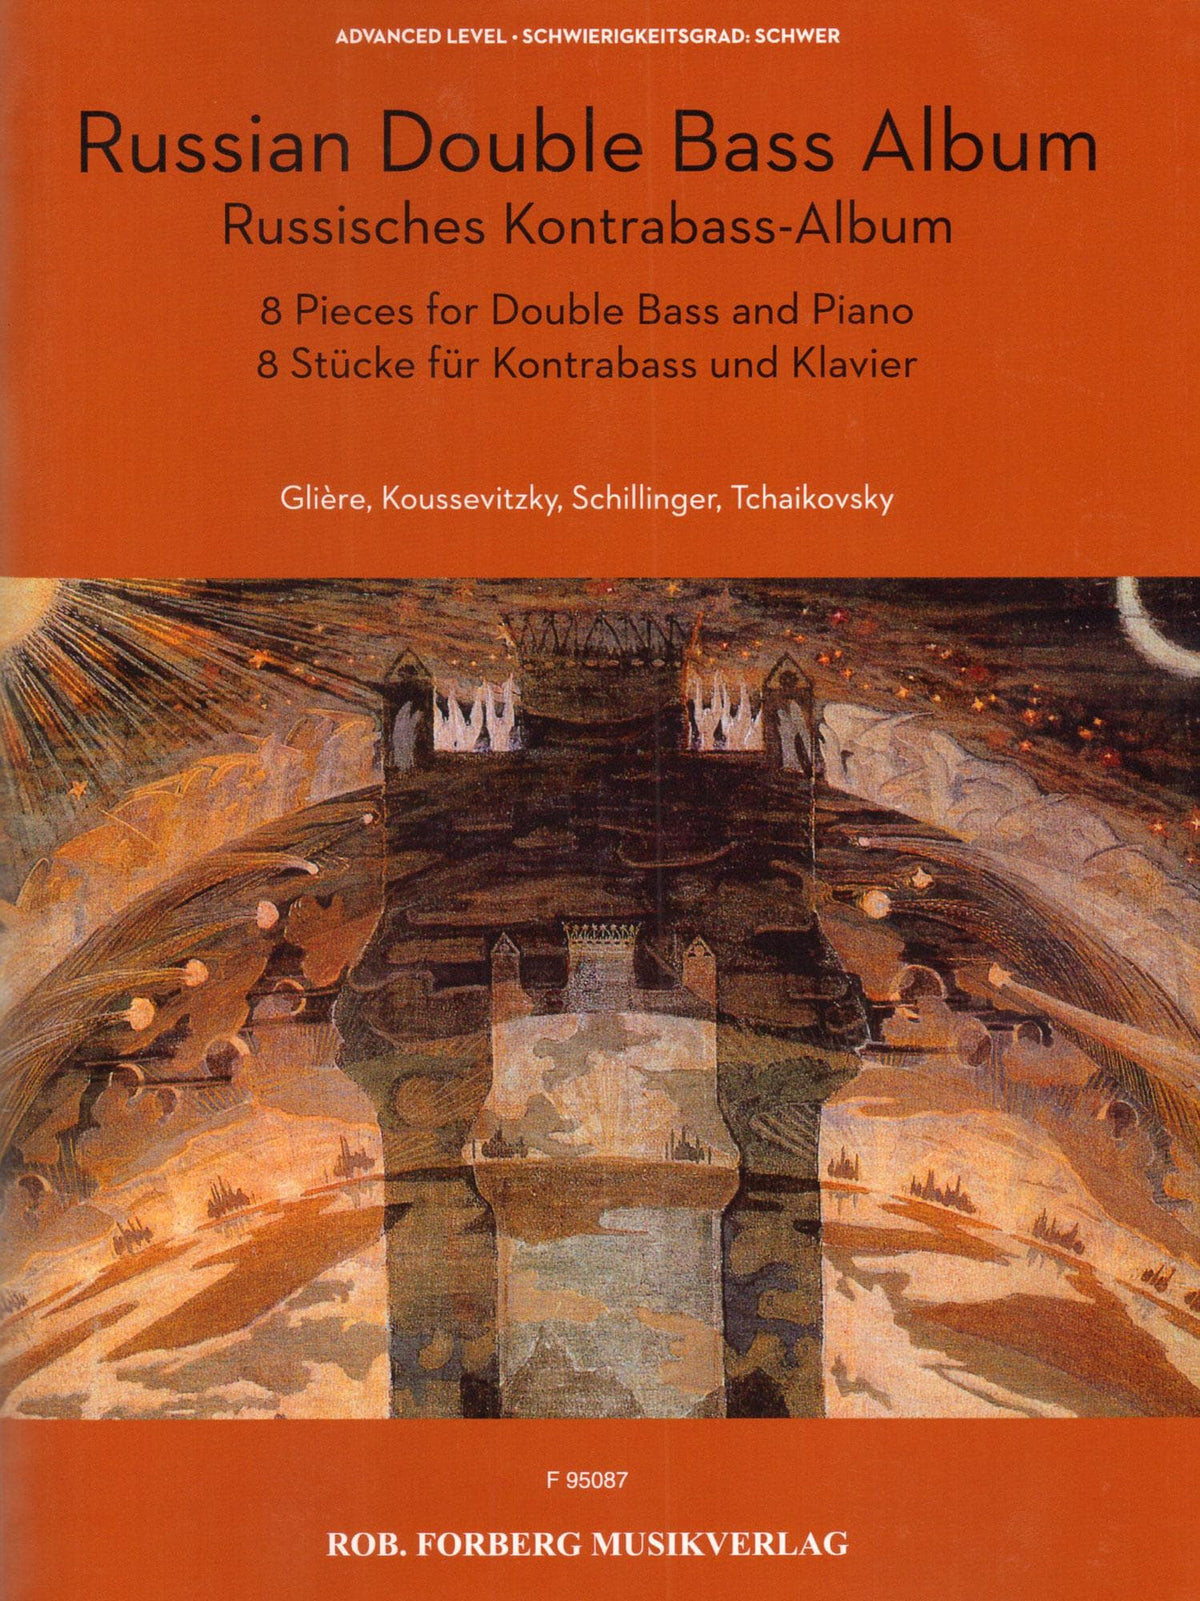 Russian Double Bass Album - 8 Pieces for Bass and Piano - Forberg Musikverlag